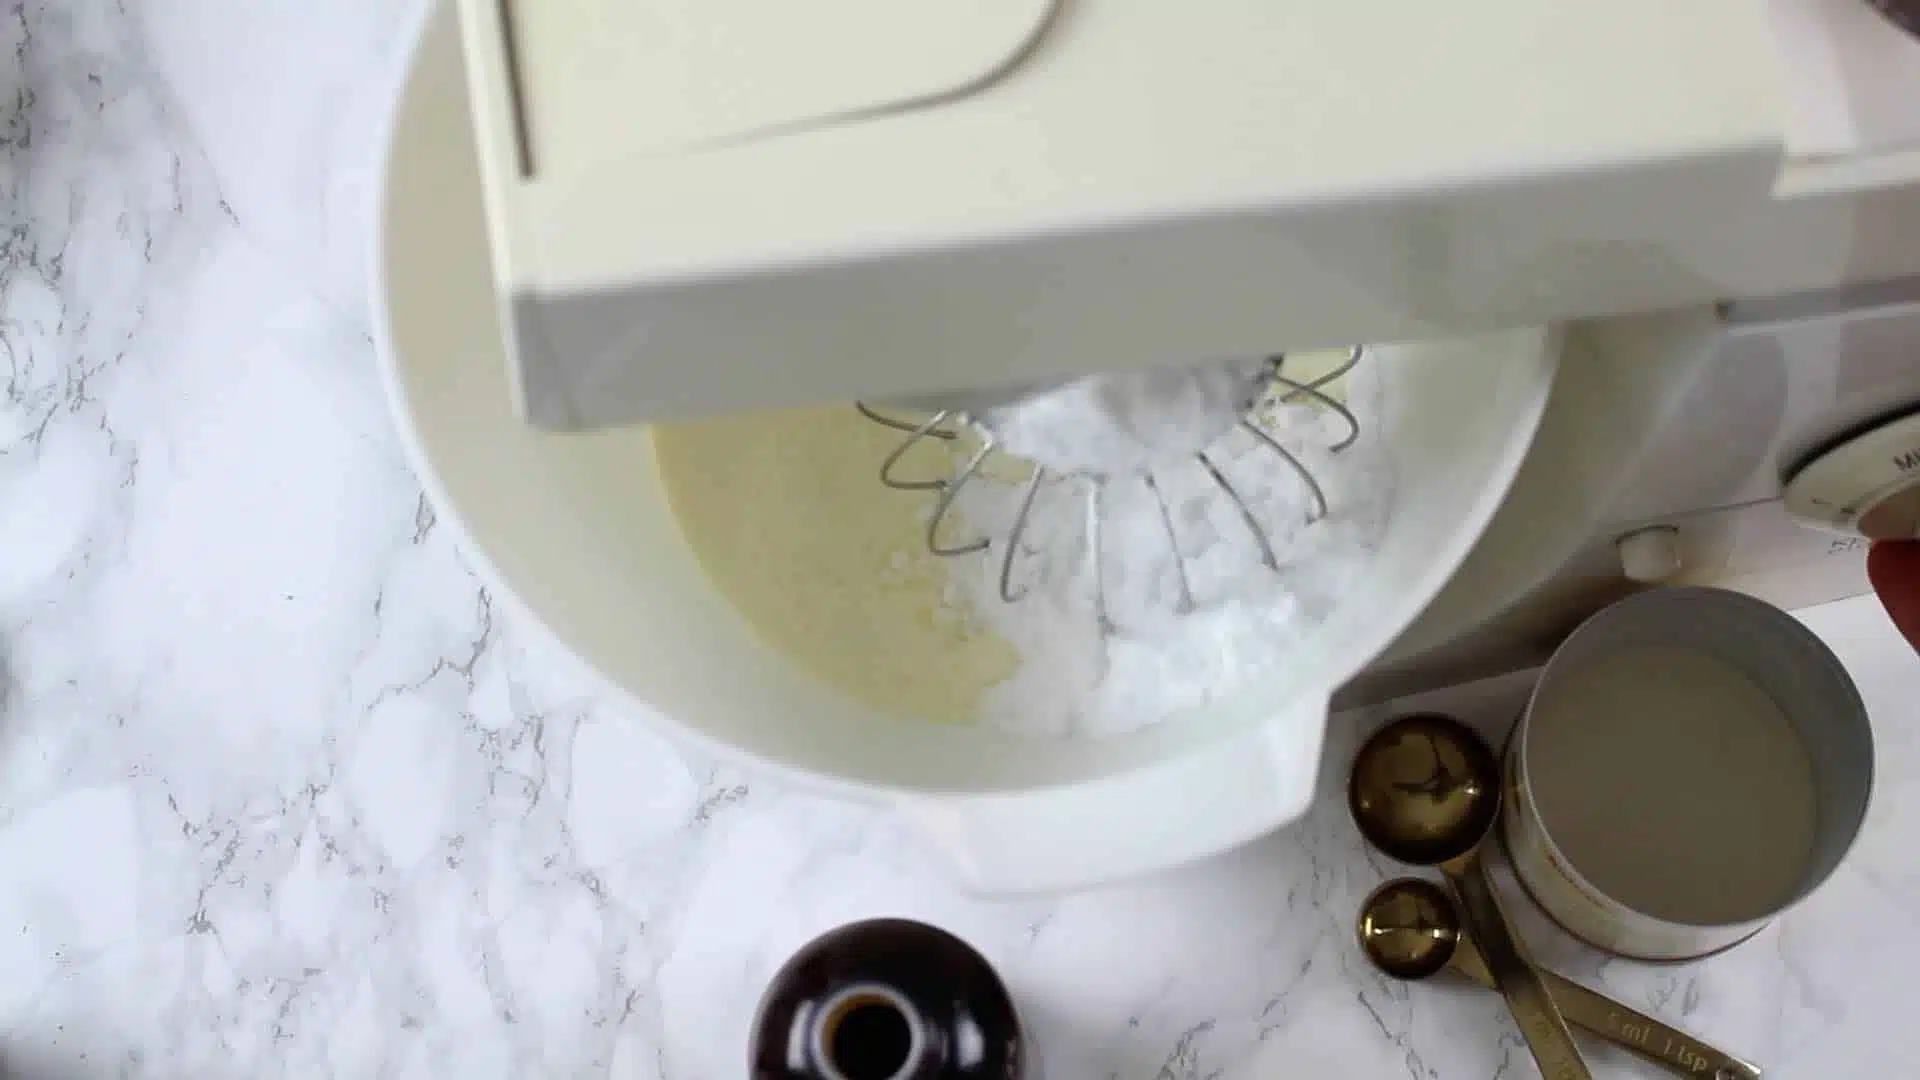 Keto Coconut Ice Cream mixing in the kitchine machine with sugar